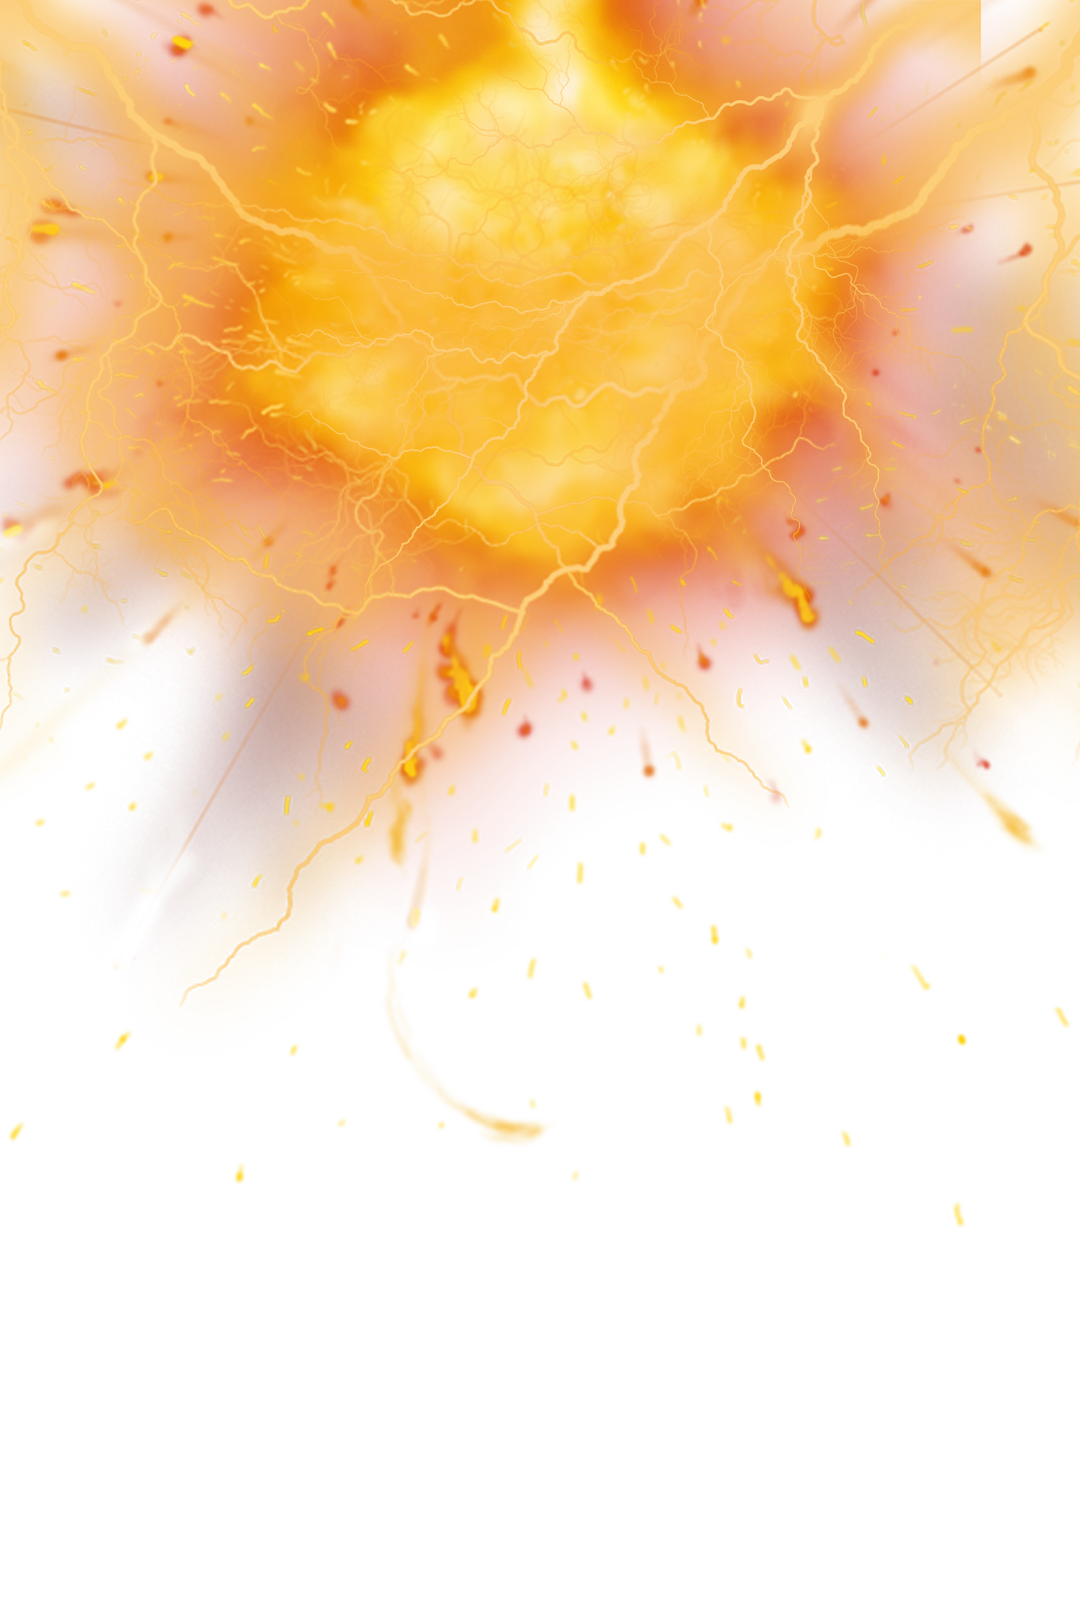 Explosion Effects Lightning PNG Image High Quality PNG Image